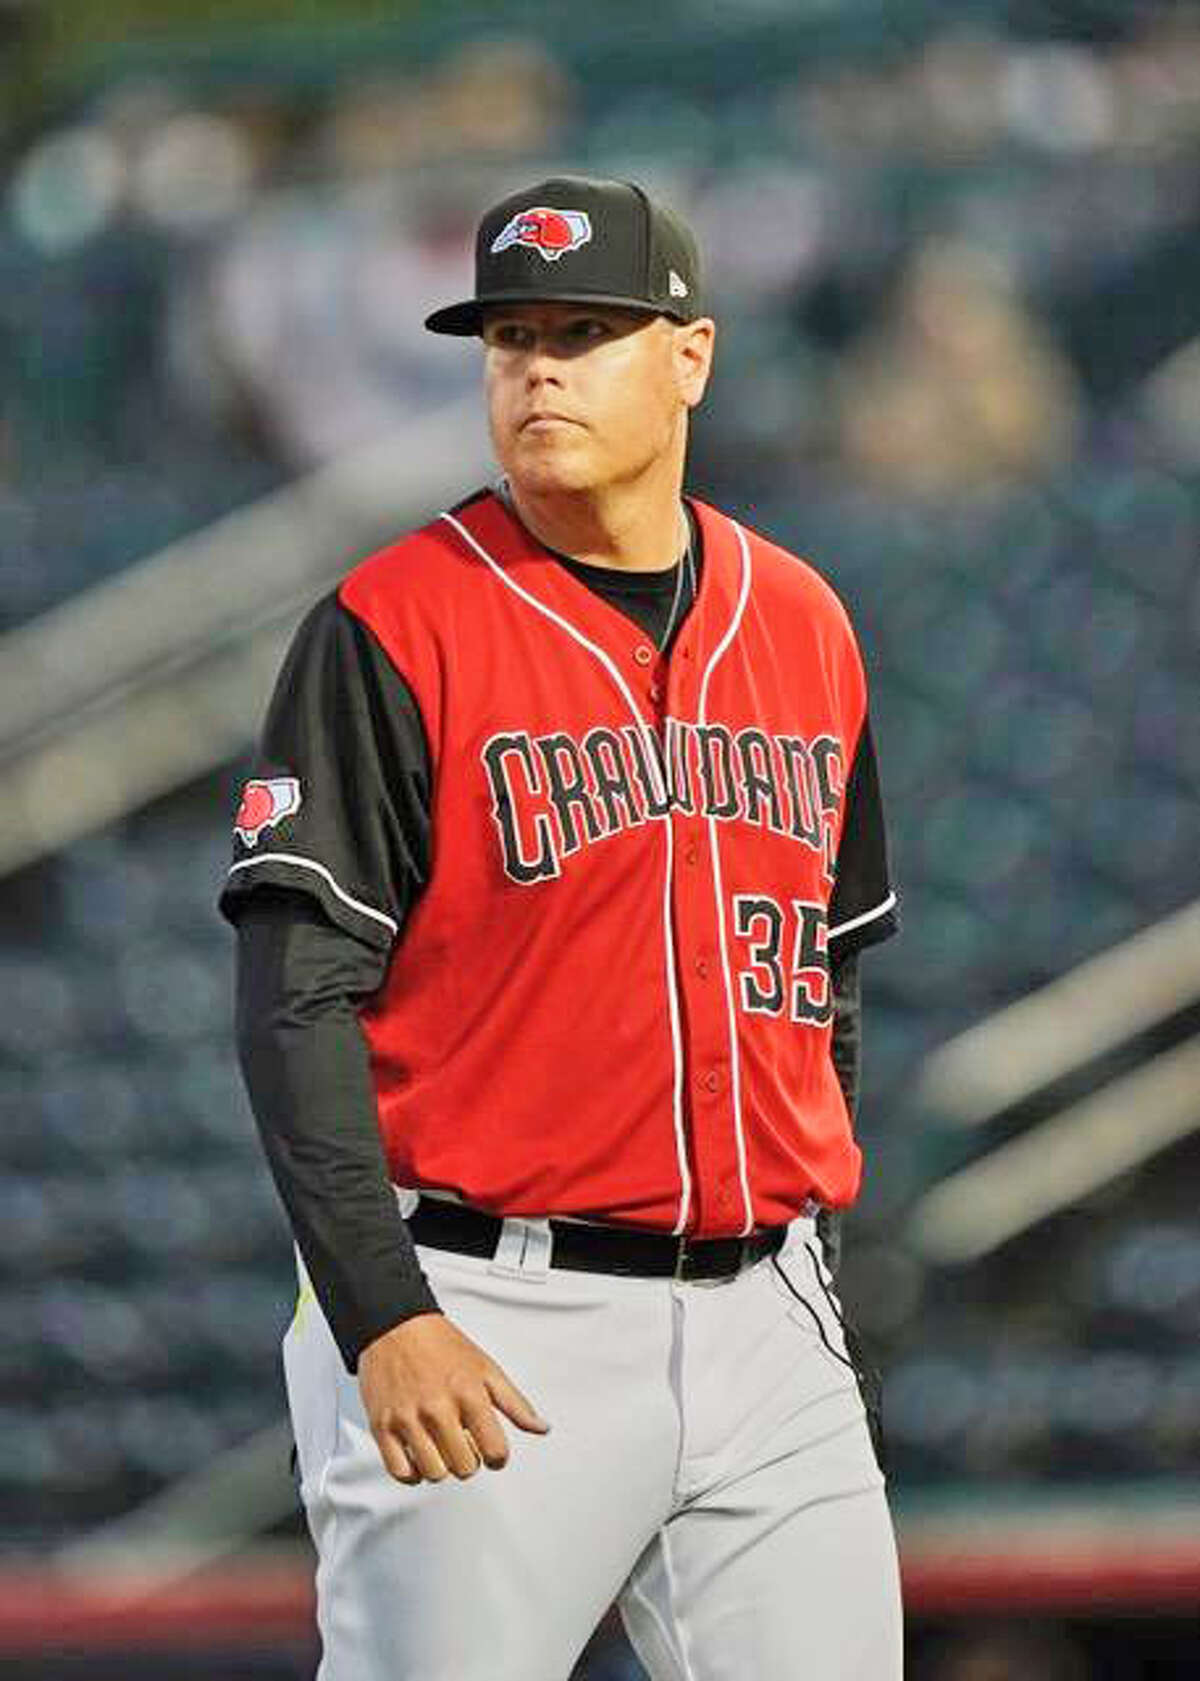 Jon Goebel, a 2004 Edwardsville graduate, is in his first season as the pitching coach for the Hickory North Carolina) Crawdads, the South Atlantic League high-A affiliate of the Texas Rangers.